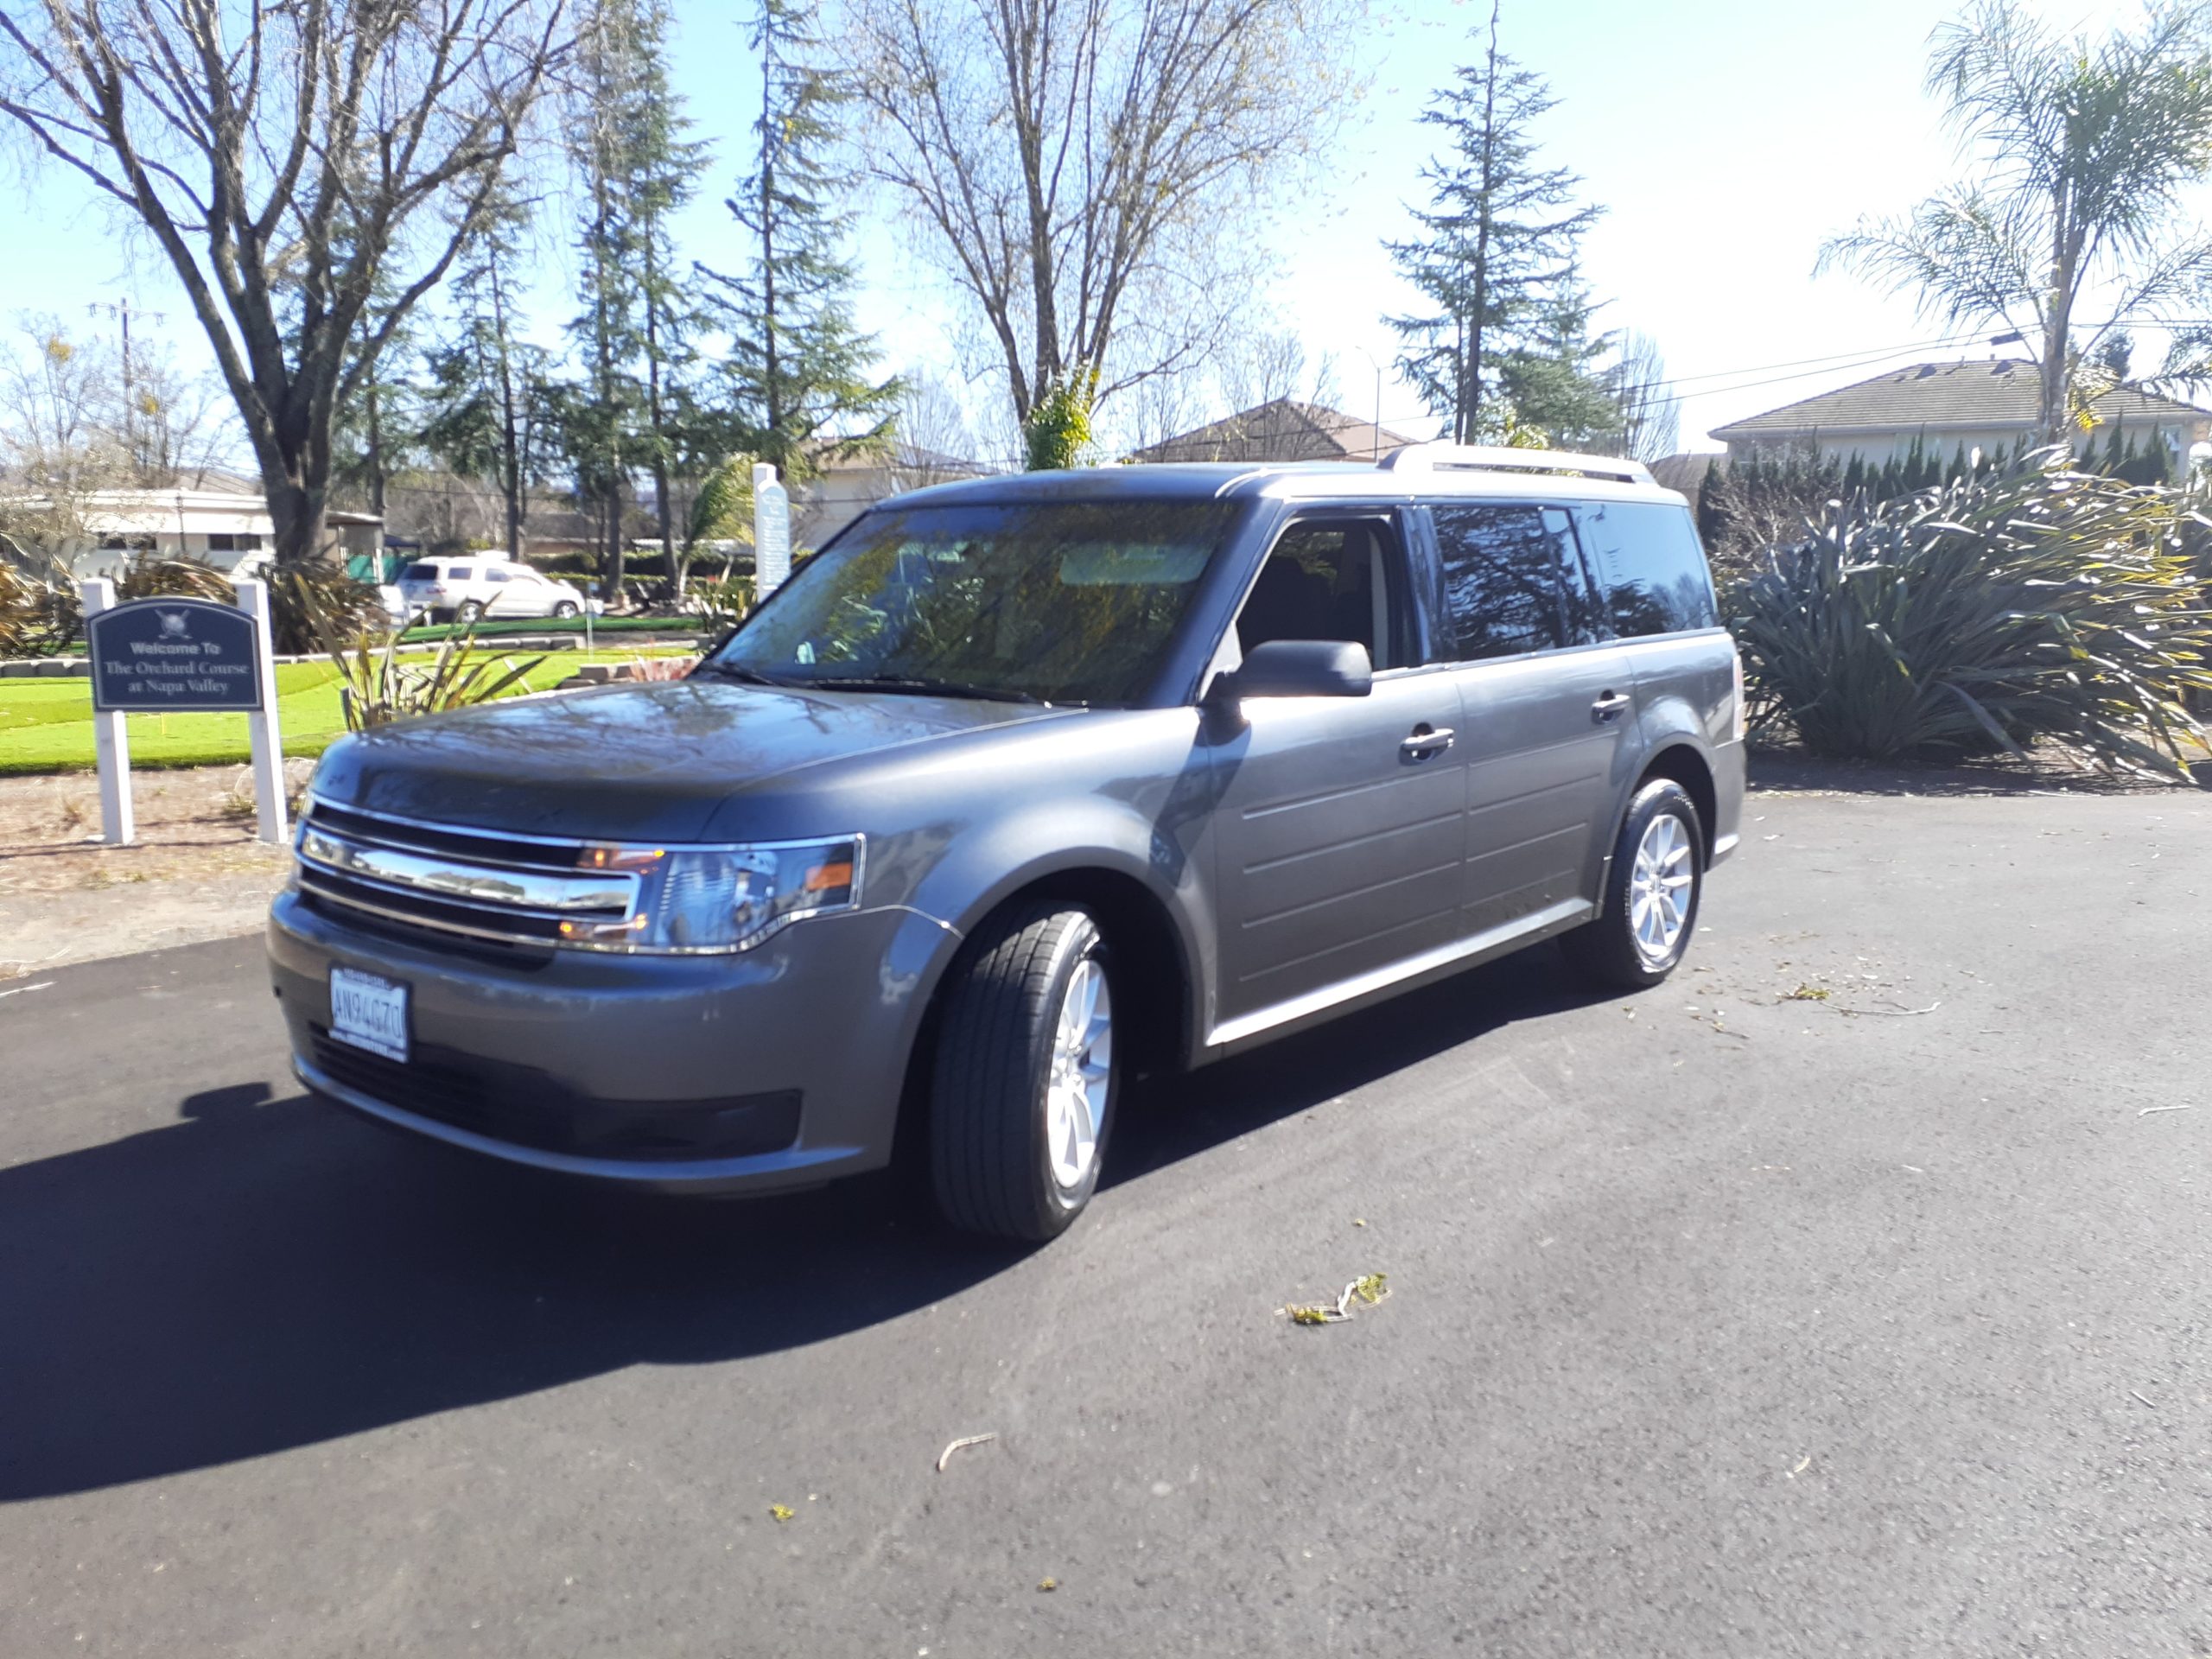 Ford Flex SUV $80 an hour with a 6 hour minimum and 20% gratuity for the driver!. NO FUEL FEE IF STAYING AND THE ITINERARY IS AROUND NAPA!